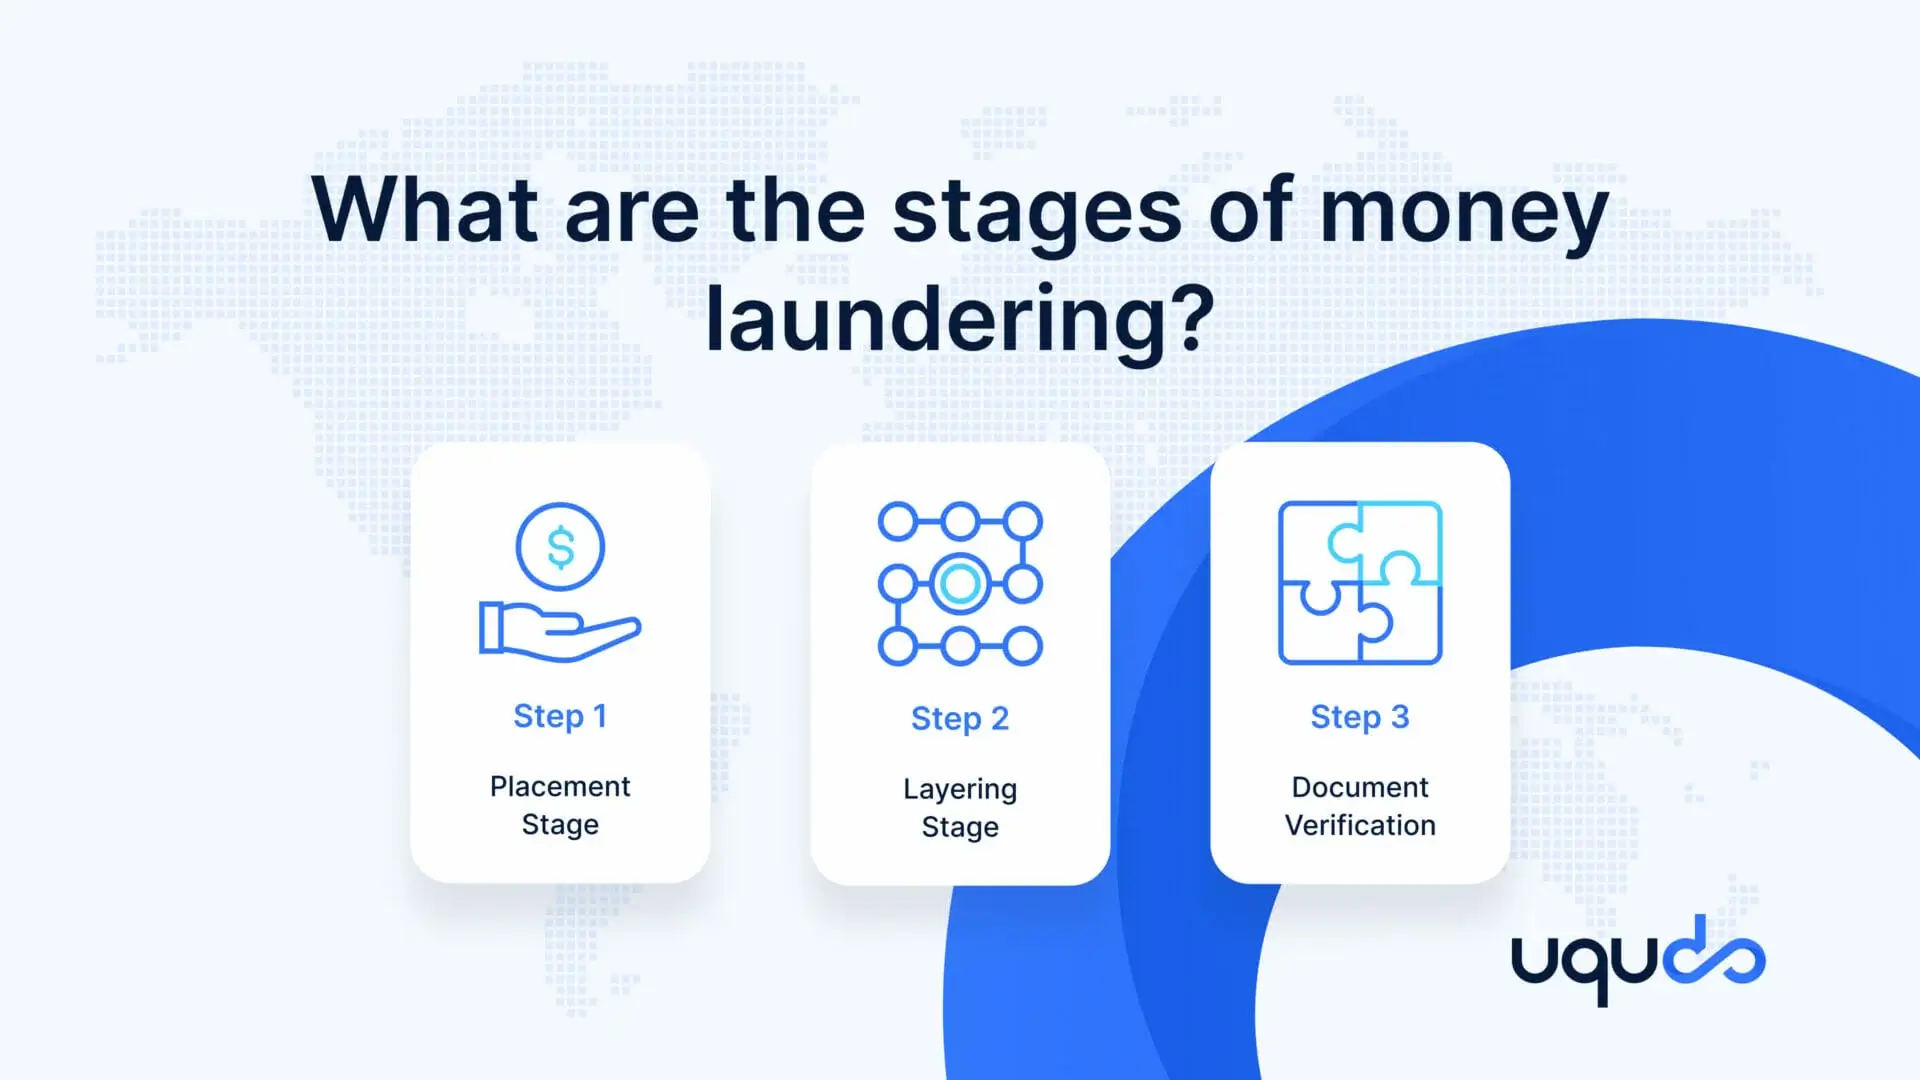 Stages of money laundering: Placement, Layering, Integration